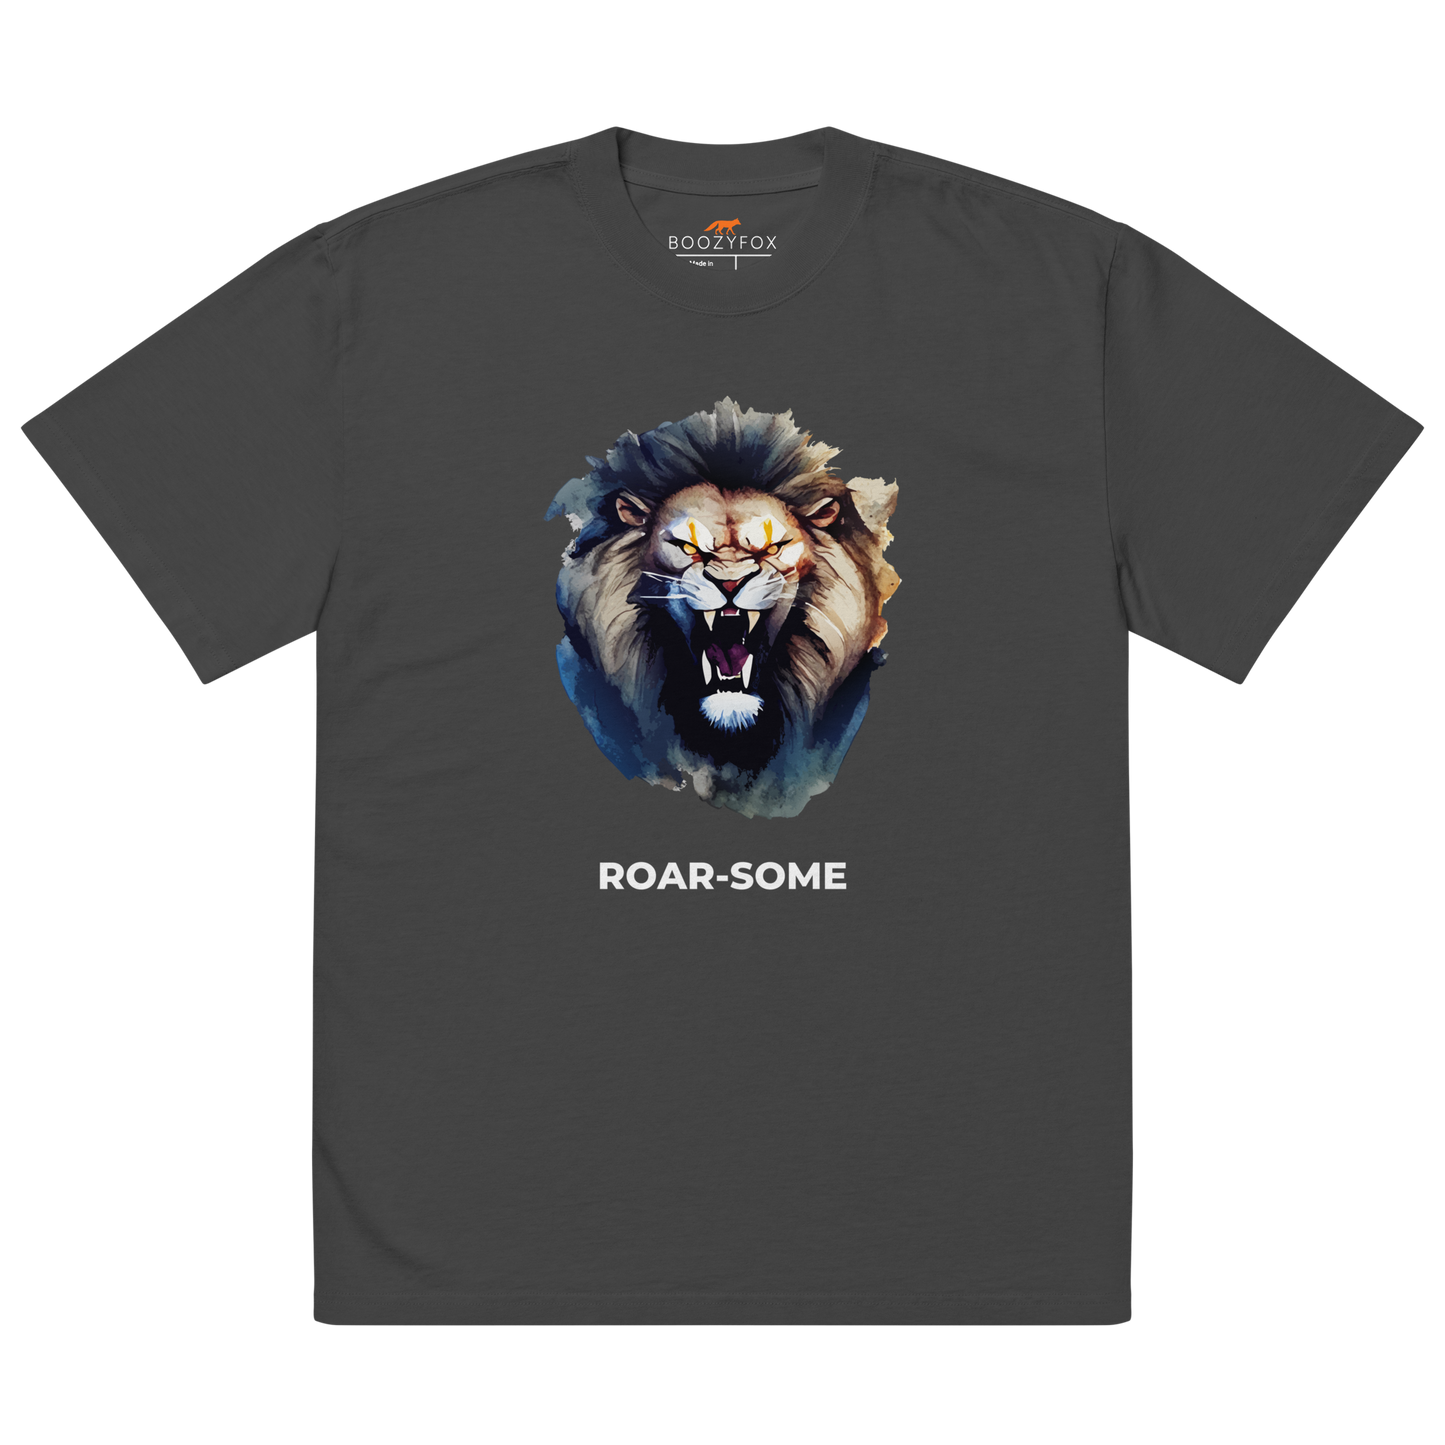 Faded Black Lion Oversized T-Shirt featuring a Roar-Some graphic on the chest - Cool Graphic Lion Oversized Tees - Boozy Fox